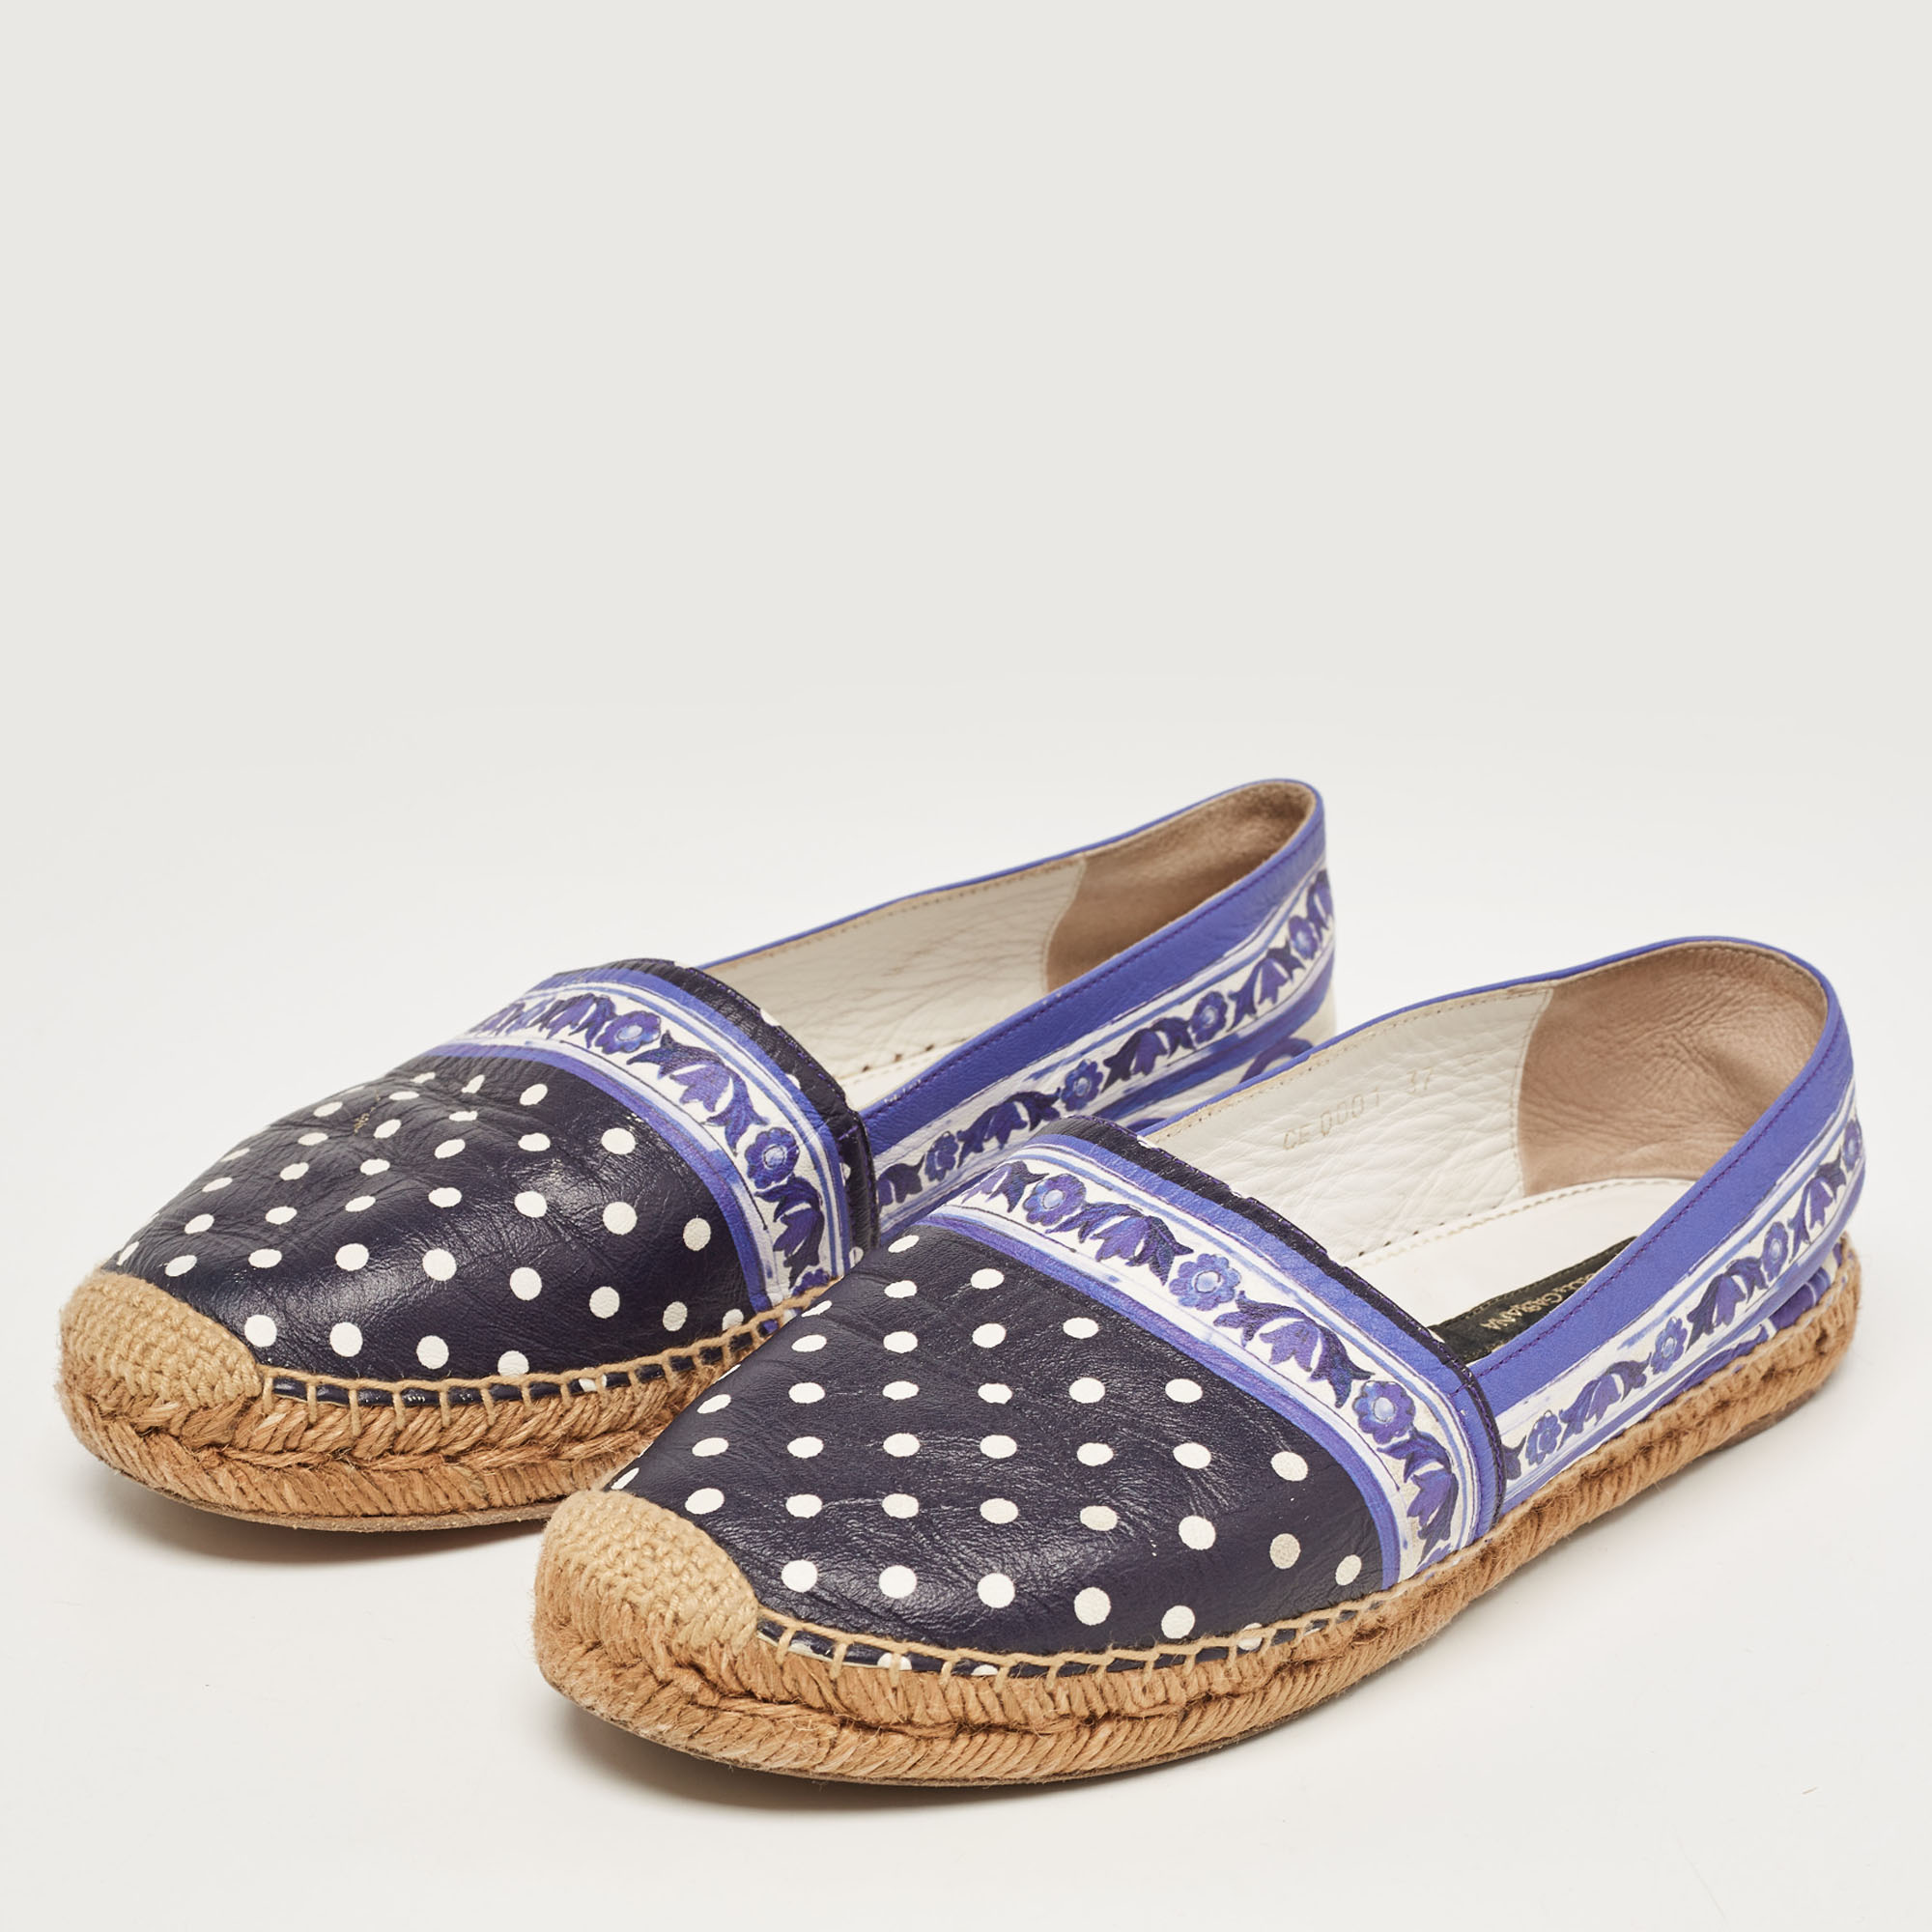 

Dolce & Gabbana Tricolor Printed Leather Espadrille Flats Size, Navy blue